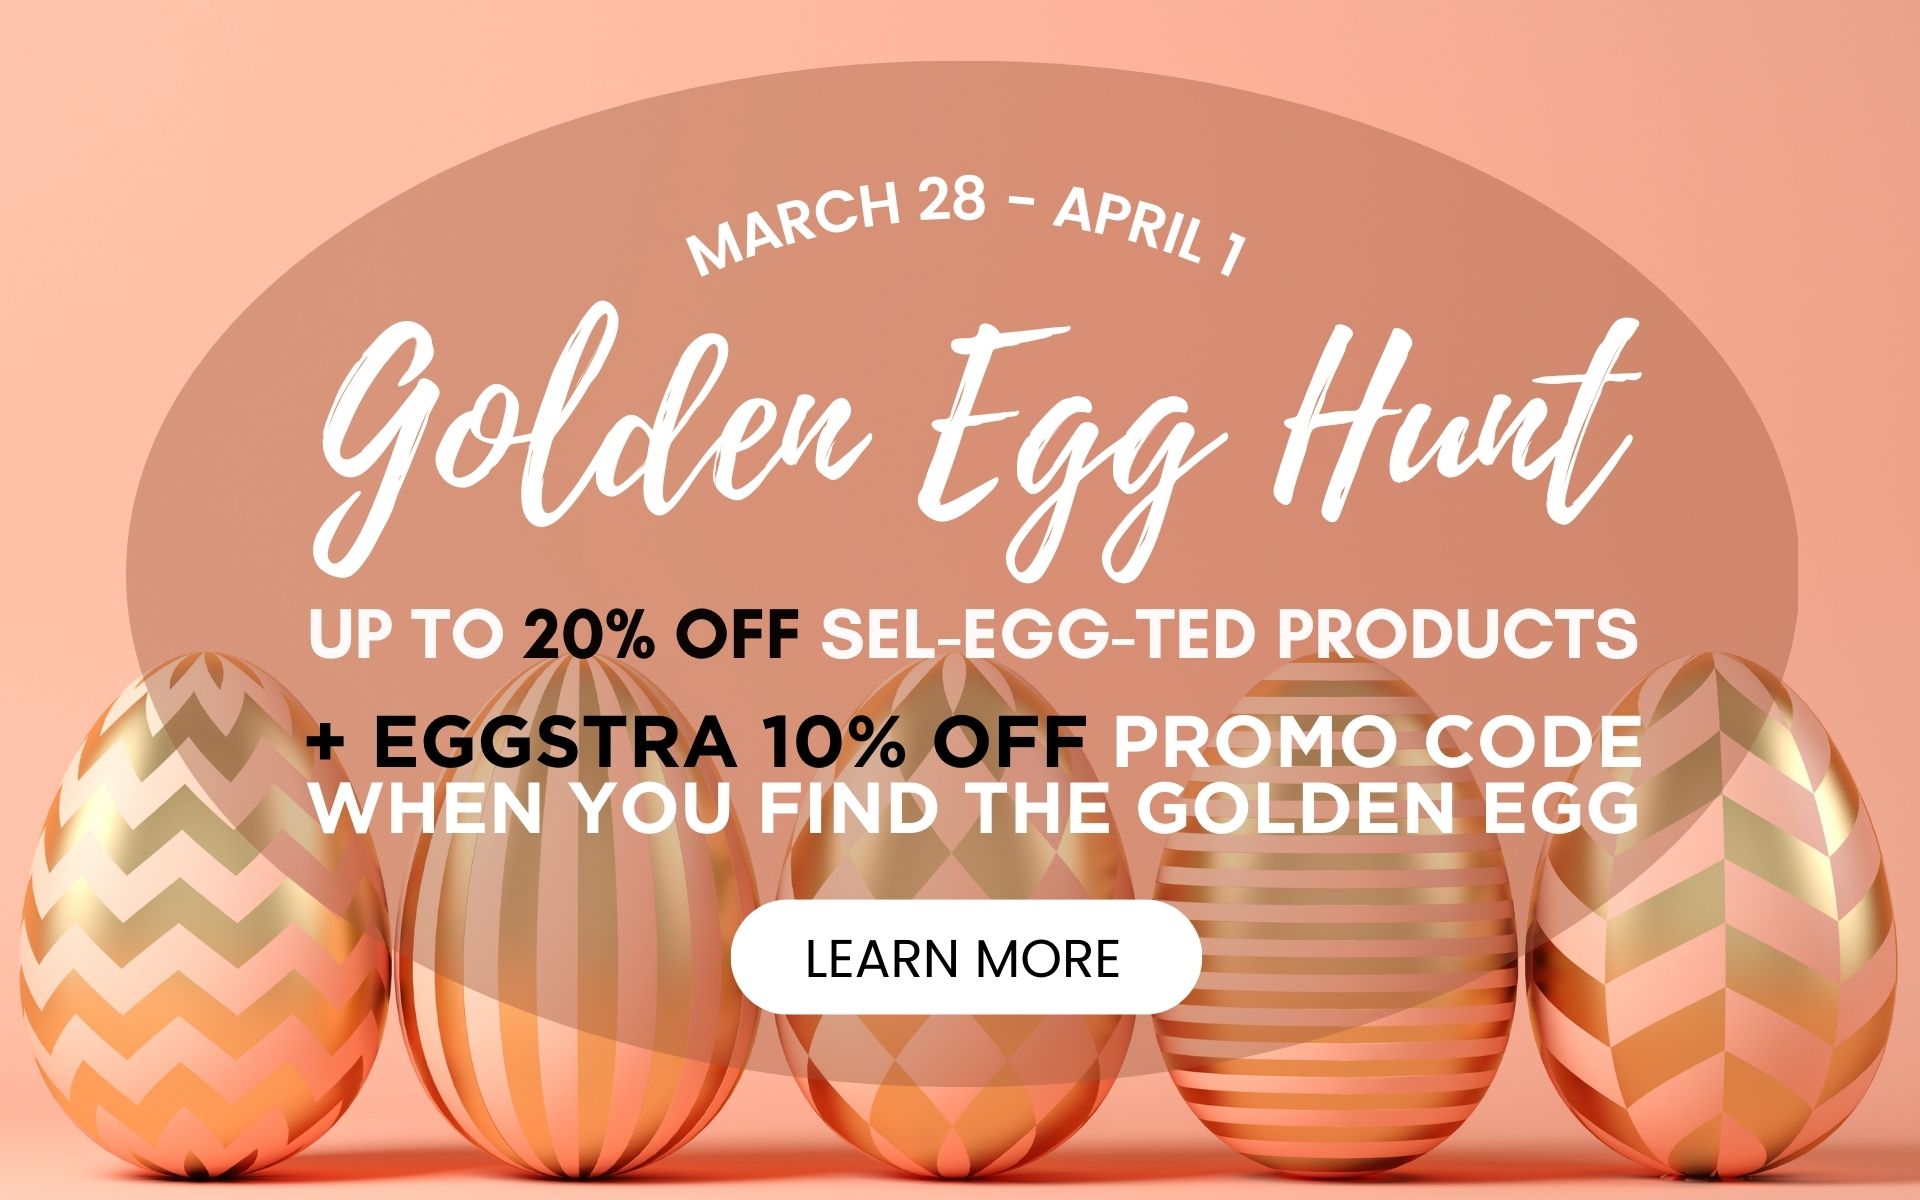 EASTER EGG HUNT: Up to 20% off selected products marked with an Easter Egg. Plus Find the Golden Egg for an extra 10% OFF Promo Code